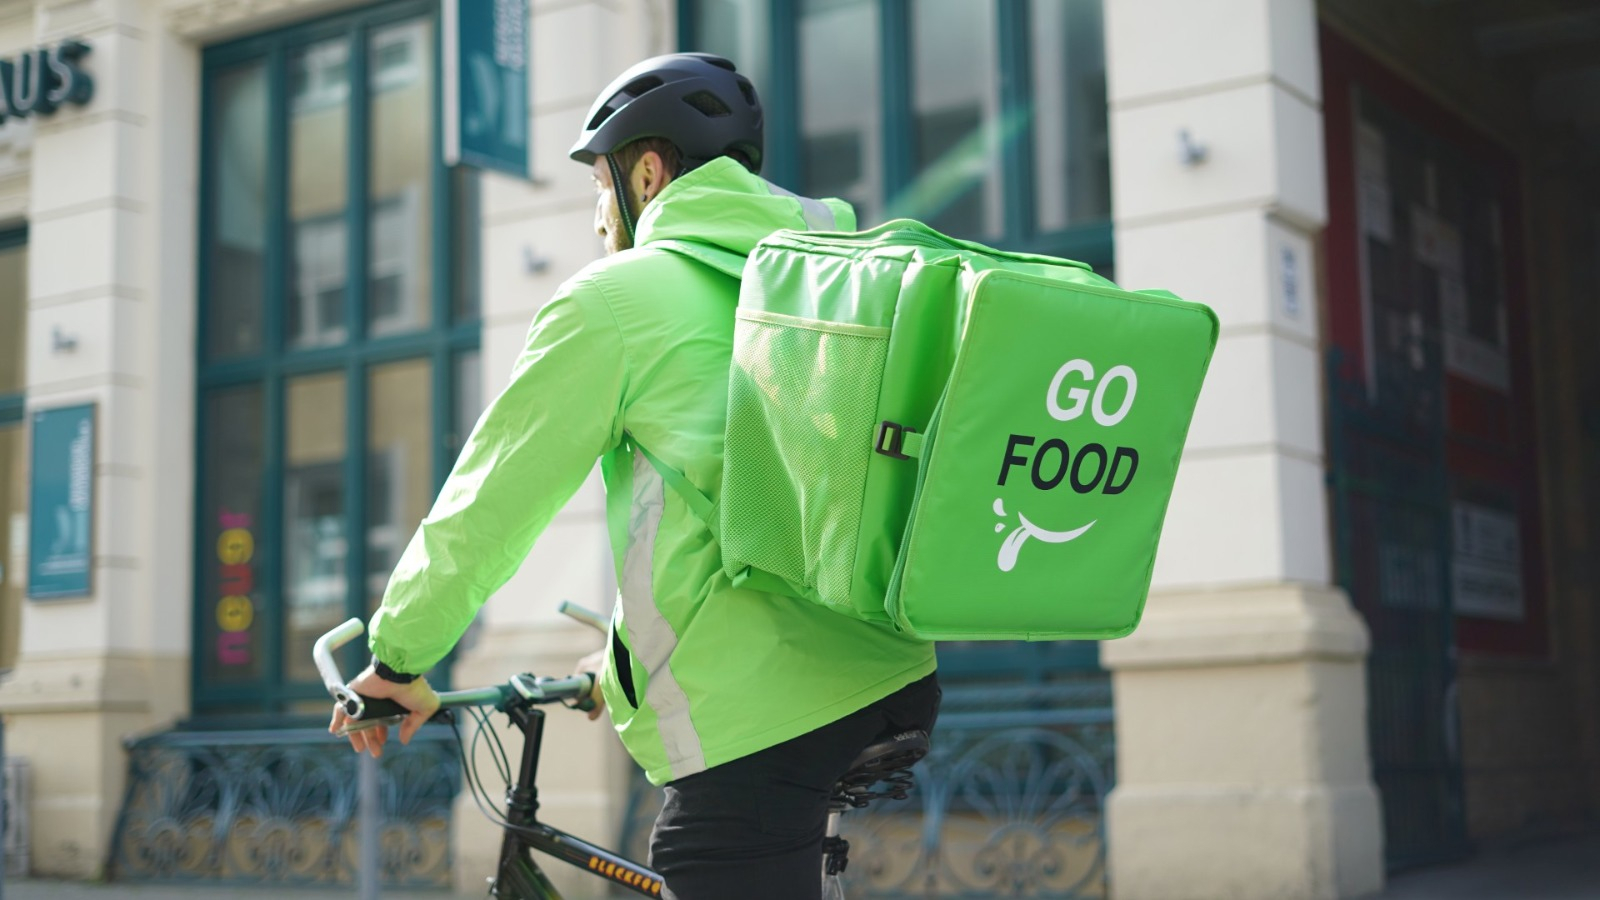 Delivery person on a bicycle with a ‘GO FOOD’ insulated backpack, navigating through an urban street.